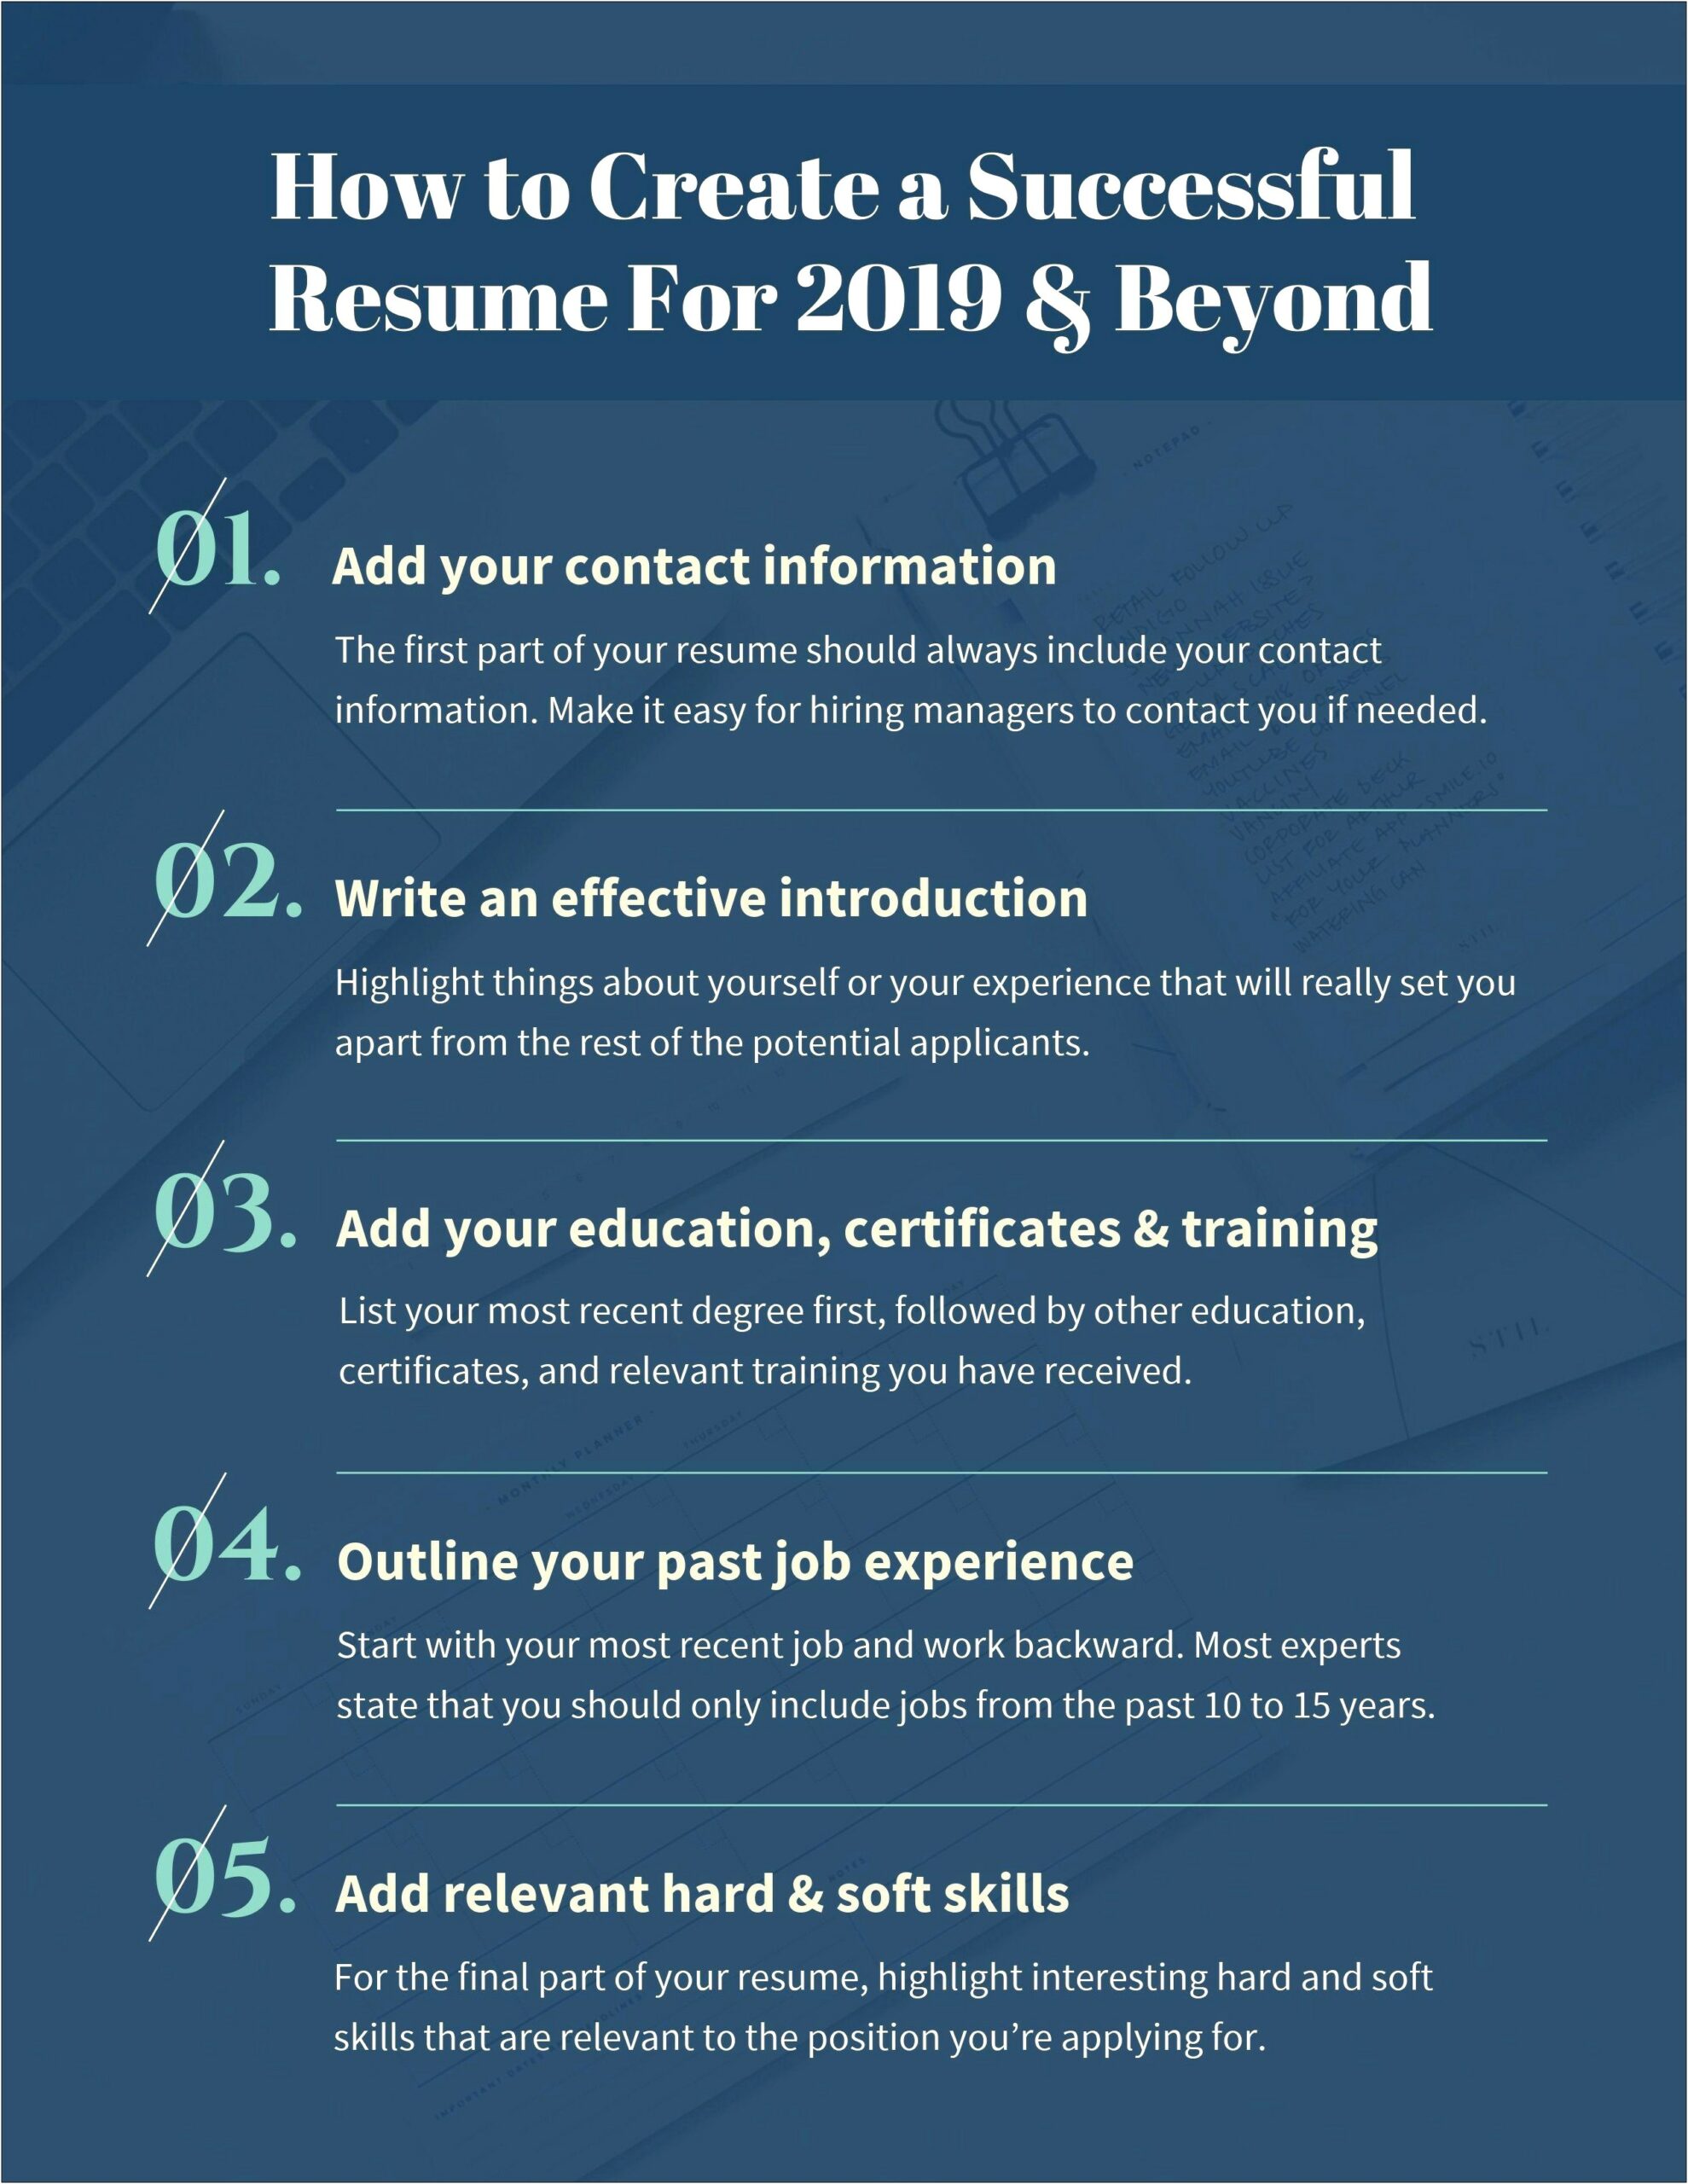 Should You Only Include Relevant Experience On Resume